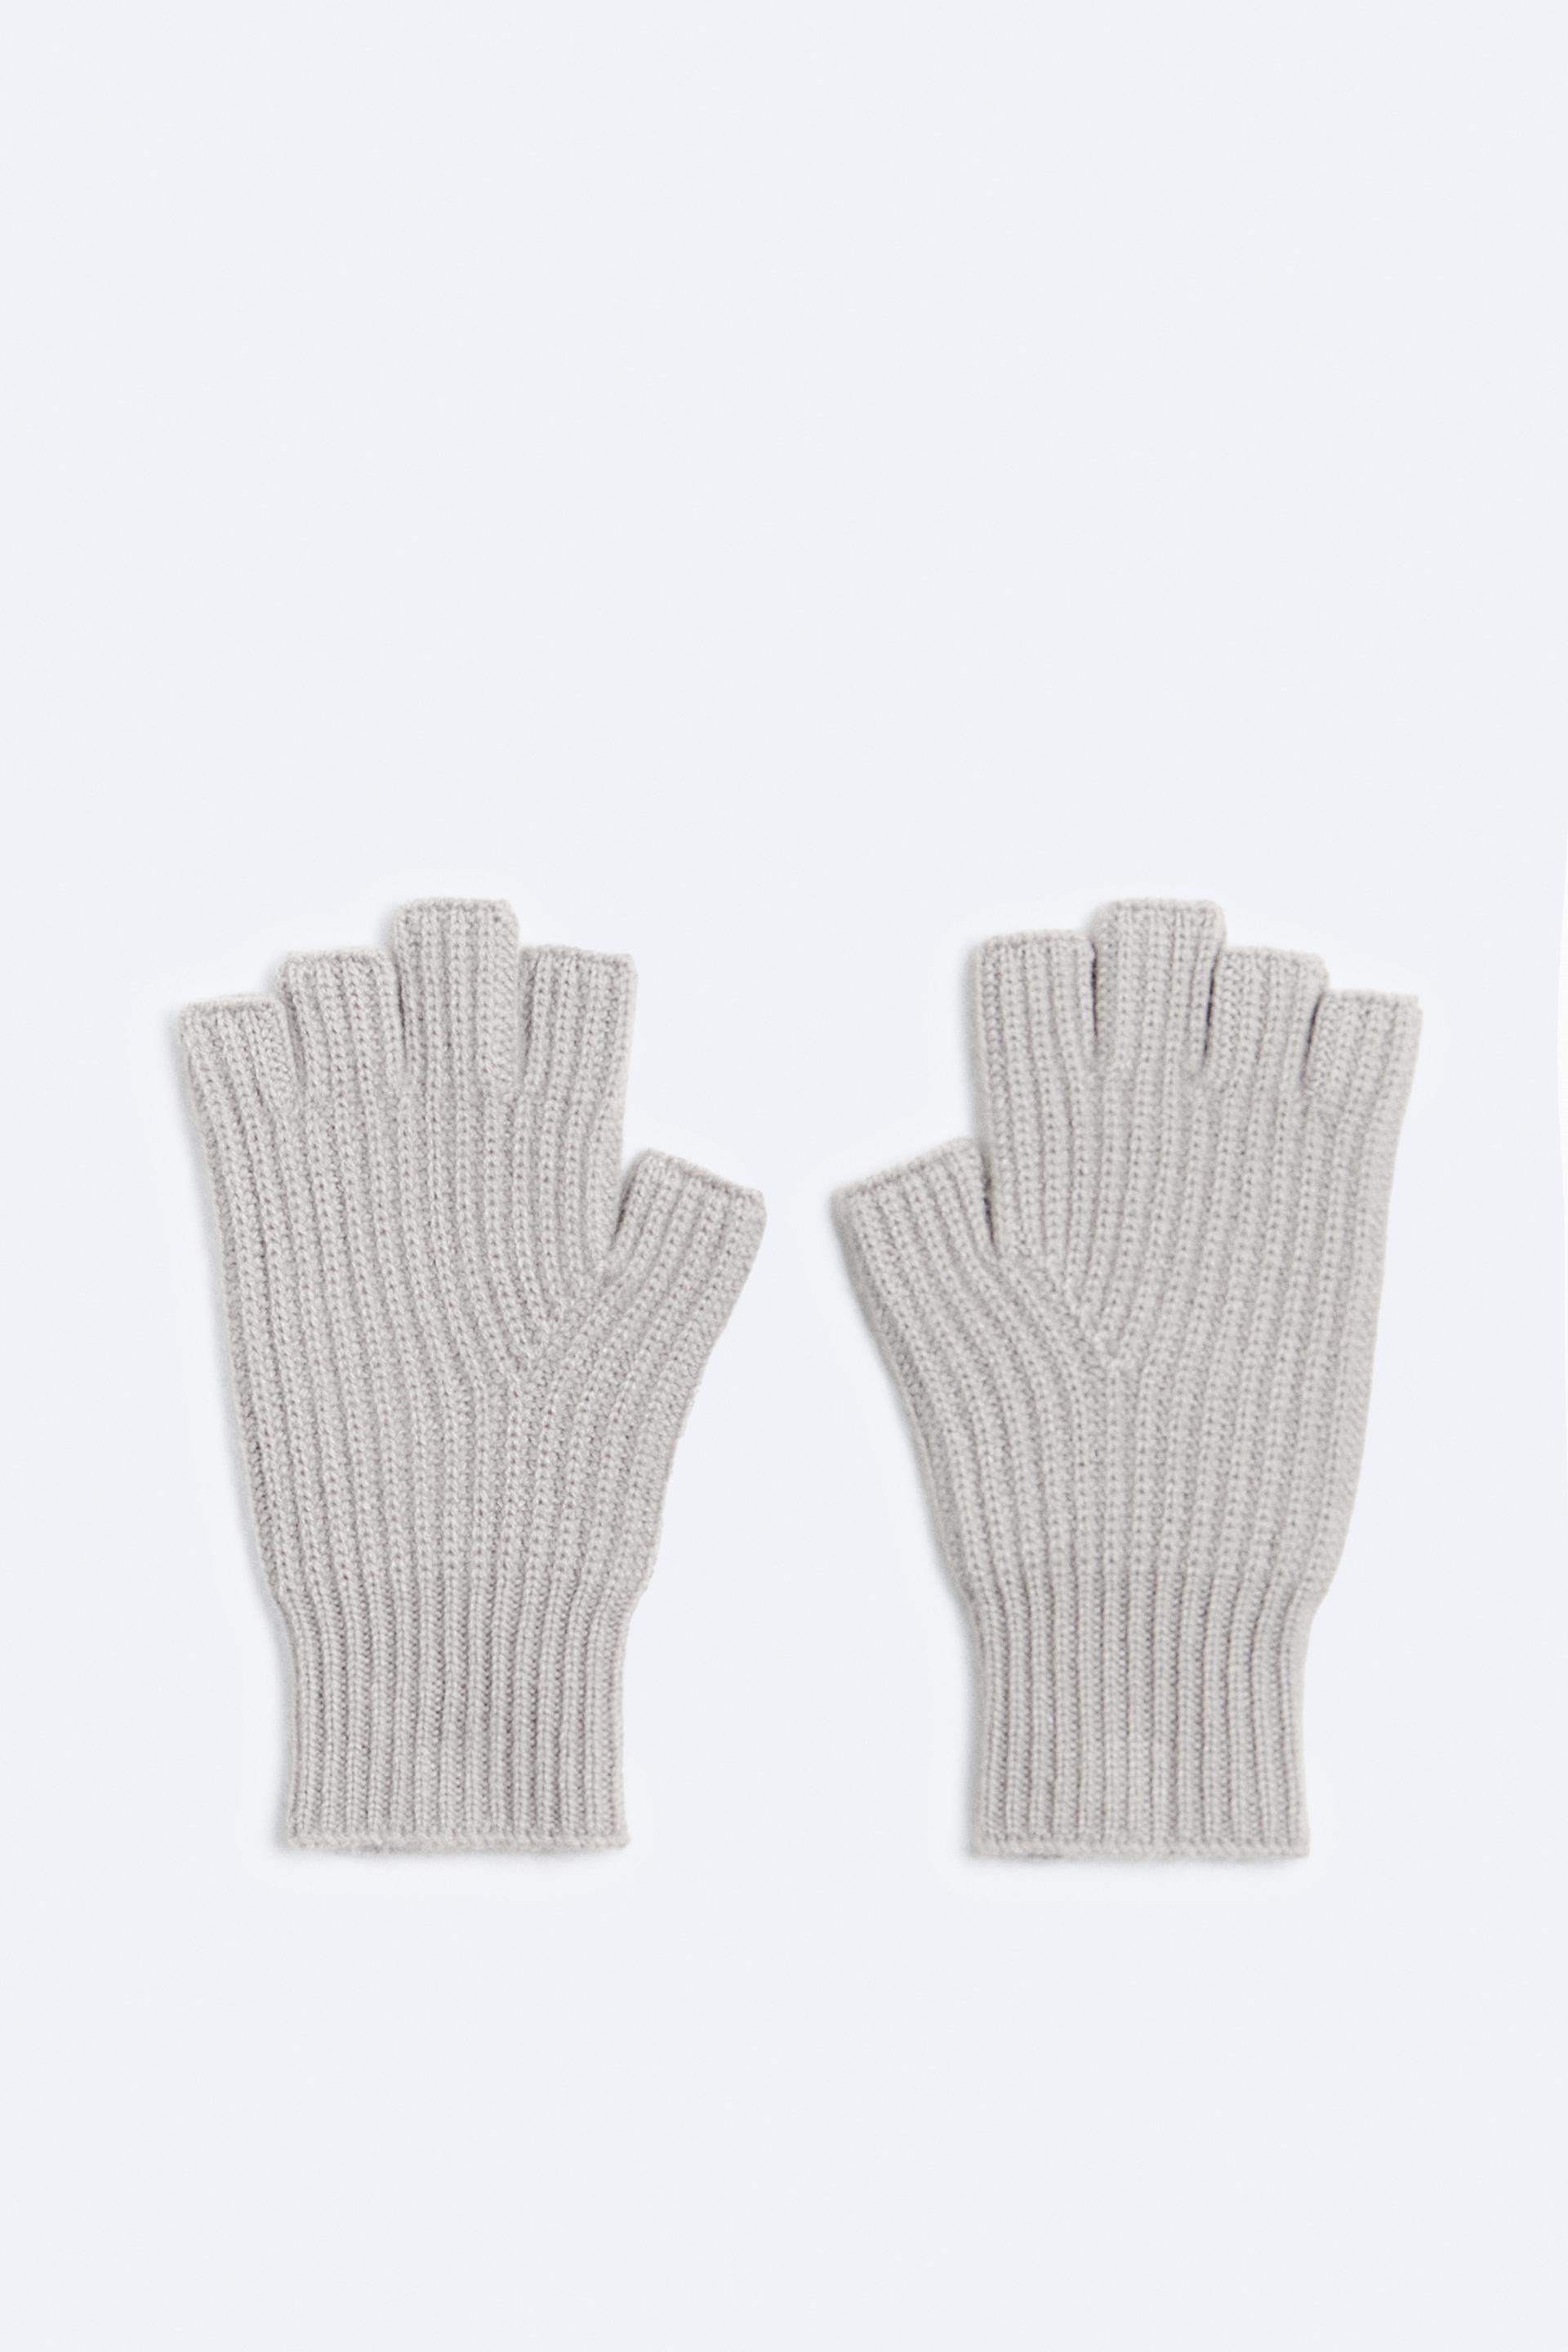 100% CASHMERE FINGERLESS GLOVES - taupe brown